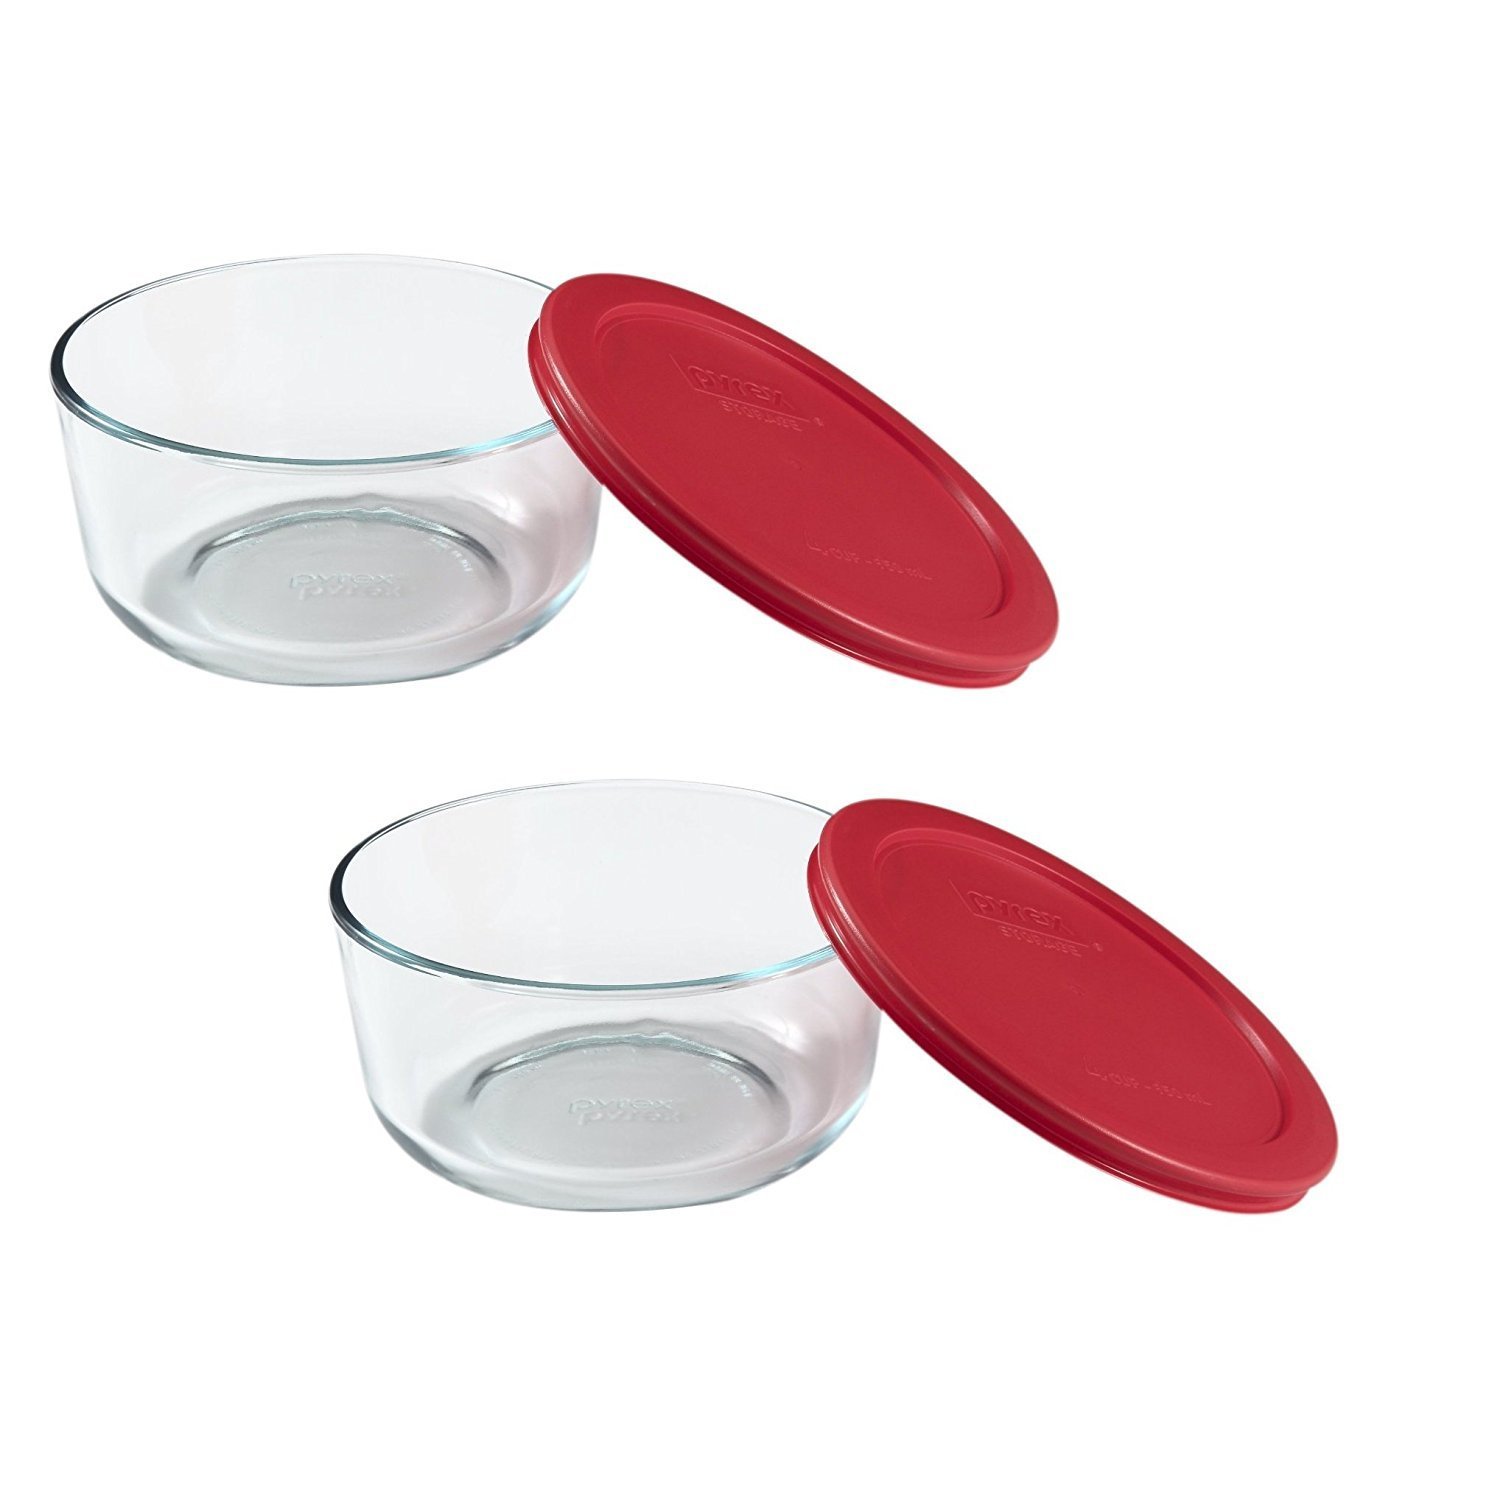 Amazon.com: Pyrex Storage Round Dish With Red Plastic Cover (Pack of ...